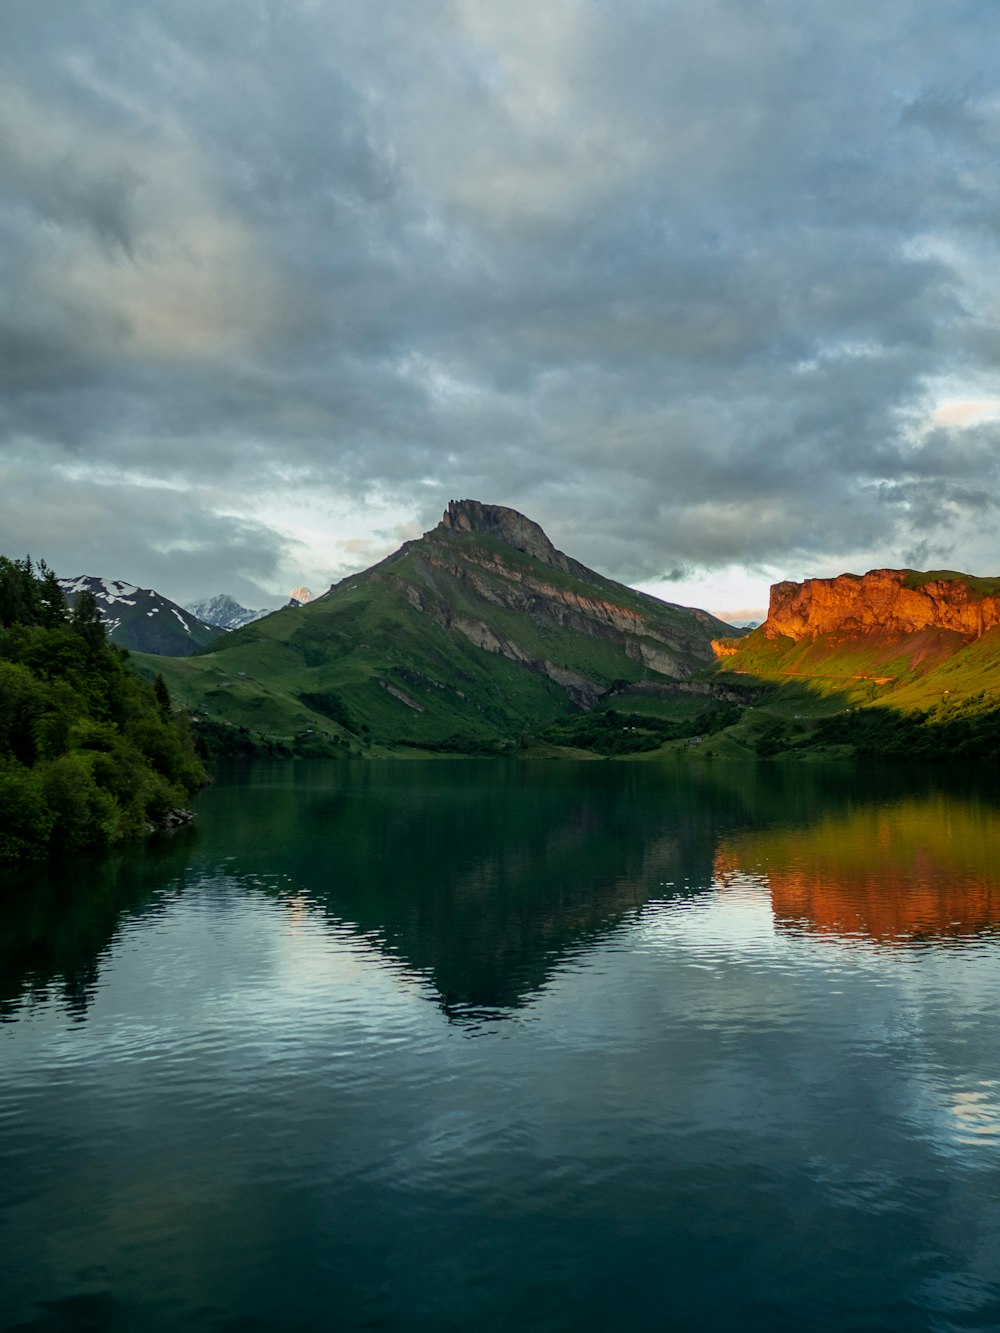 green and brown mountain beside lake under cloudy sky during daytime